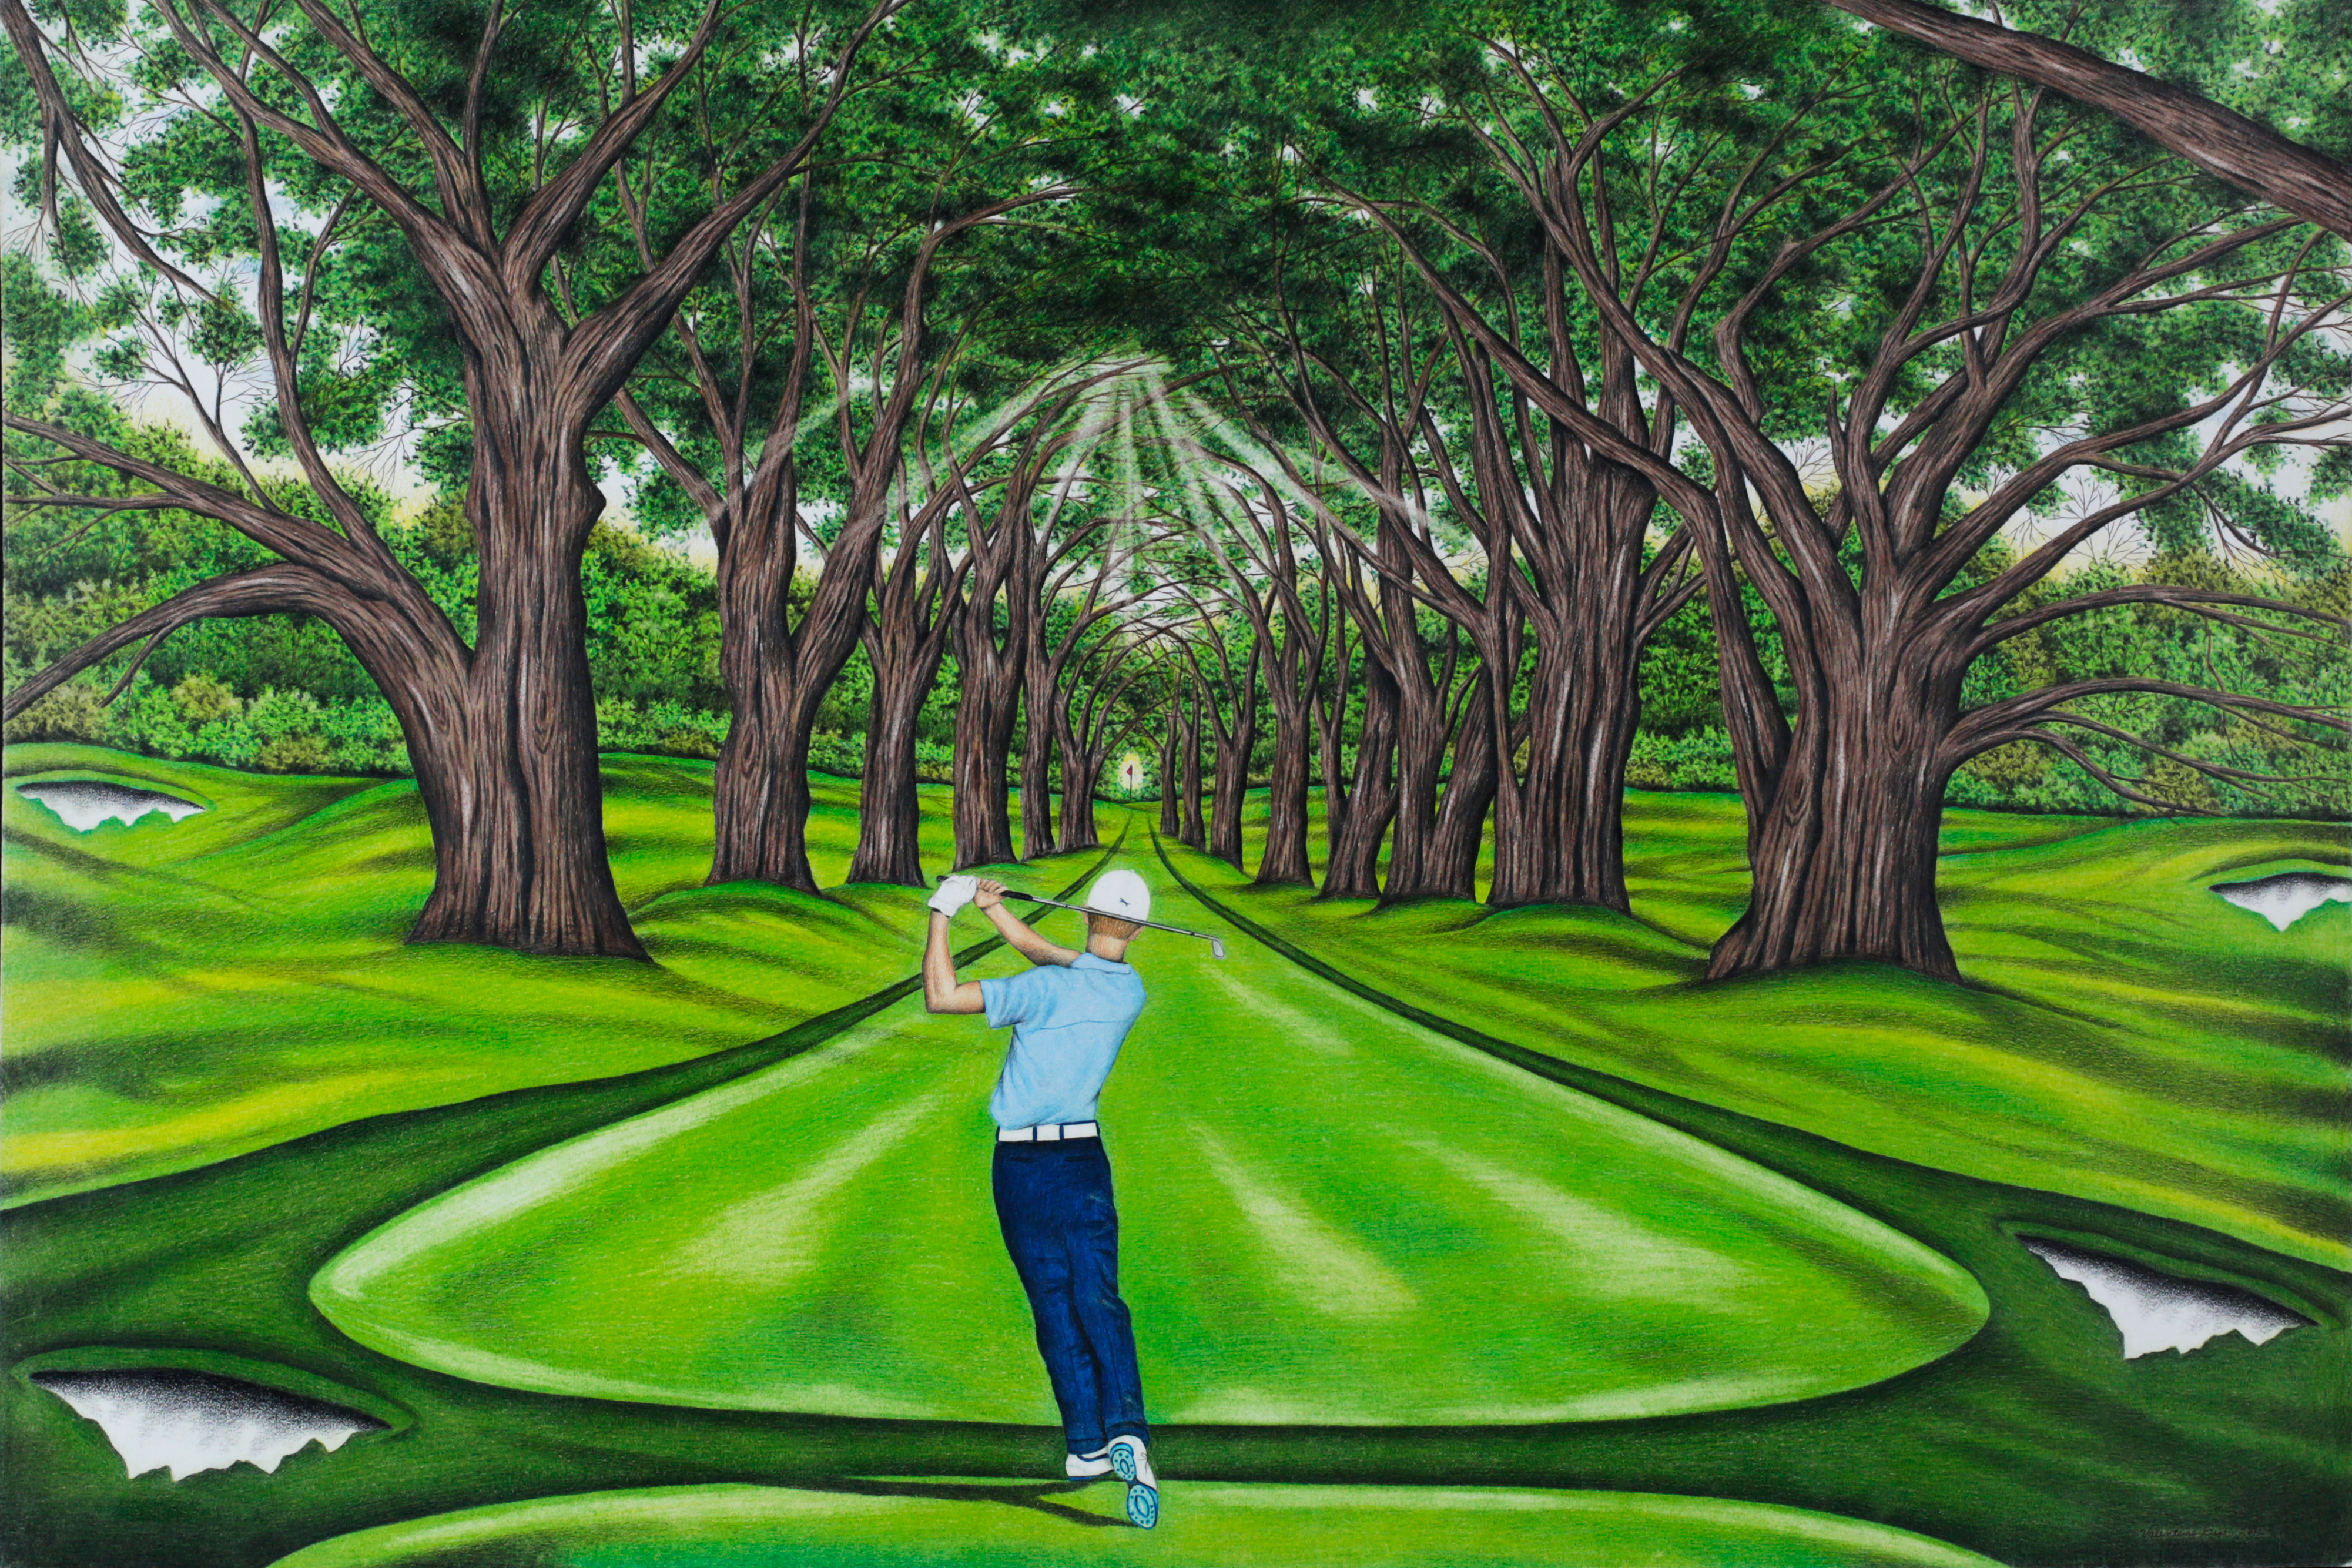 A sampling of Dixon's surreal golf drawings | and Tour Information | Golf Digest